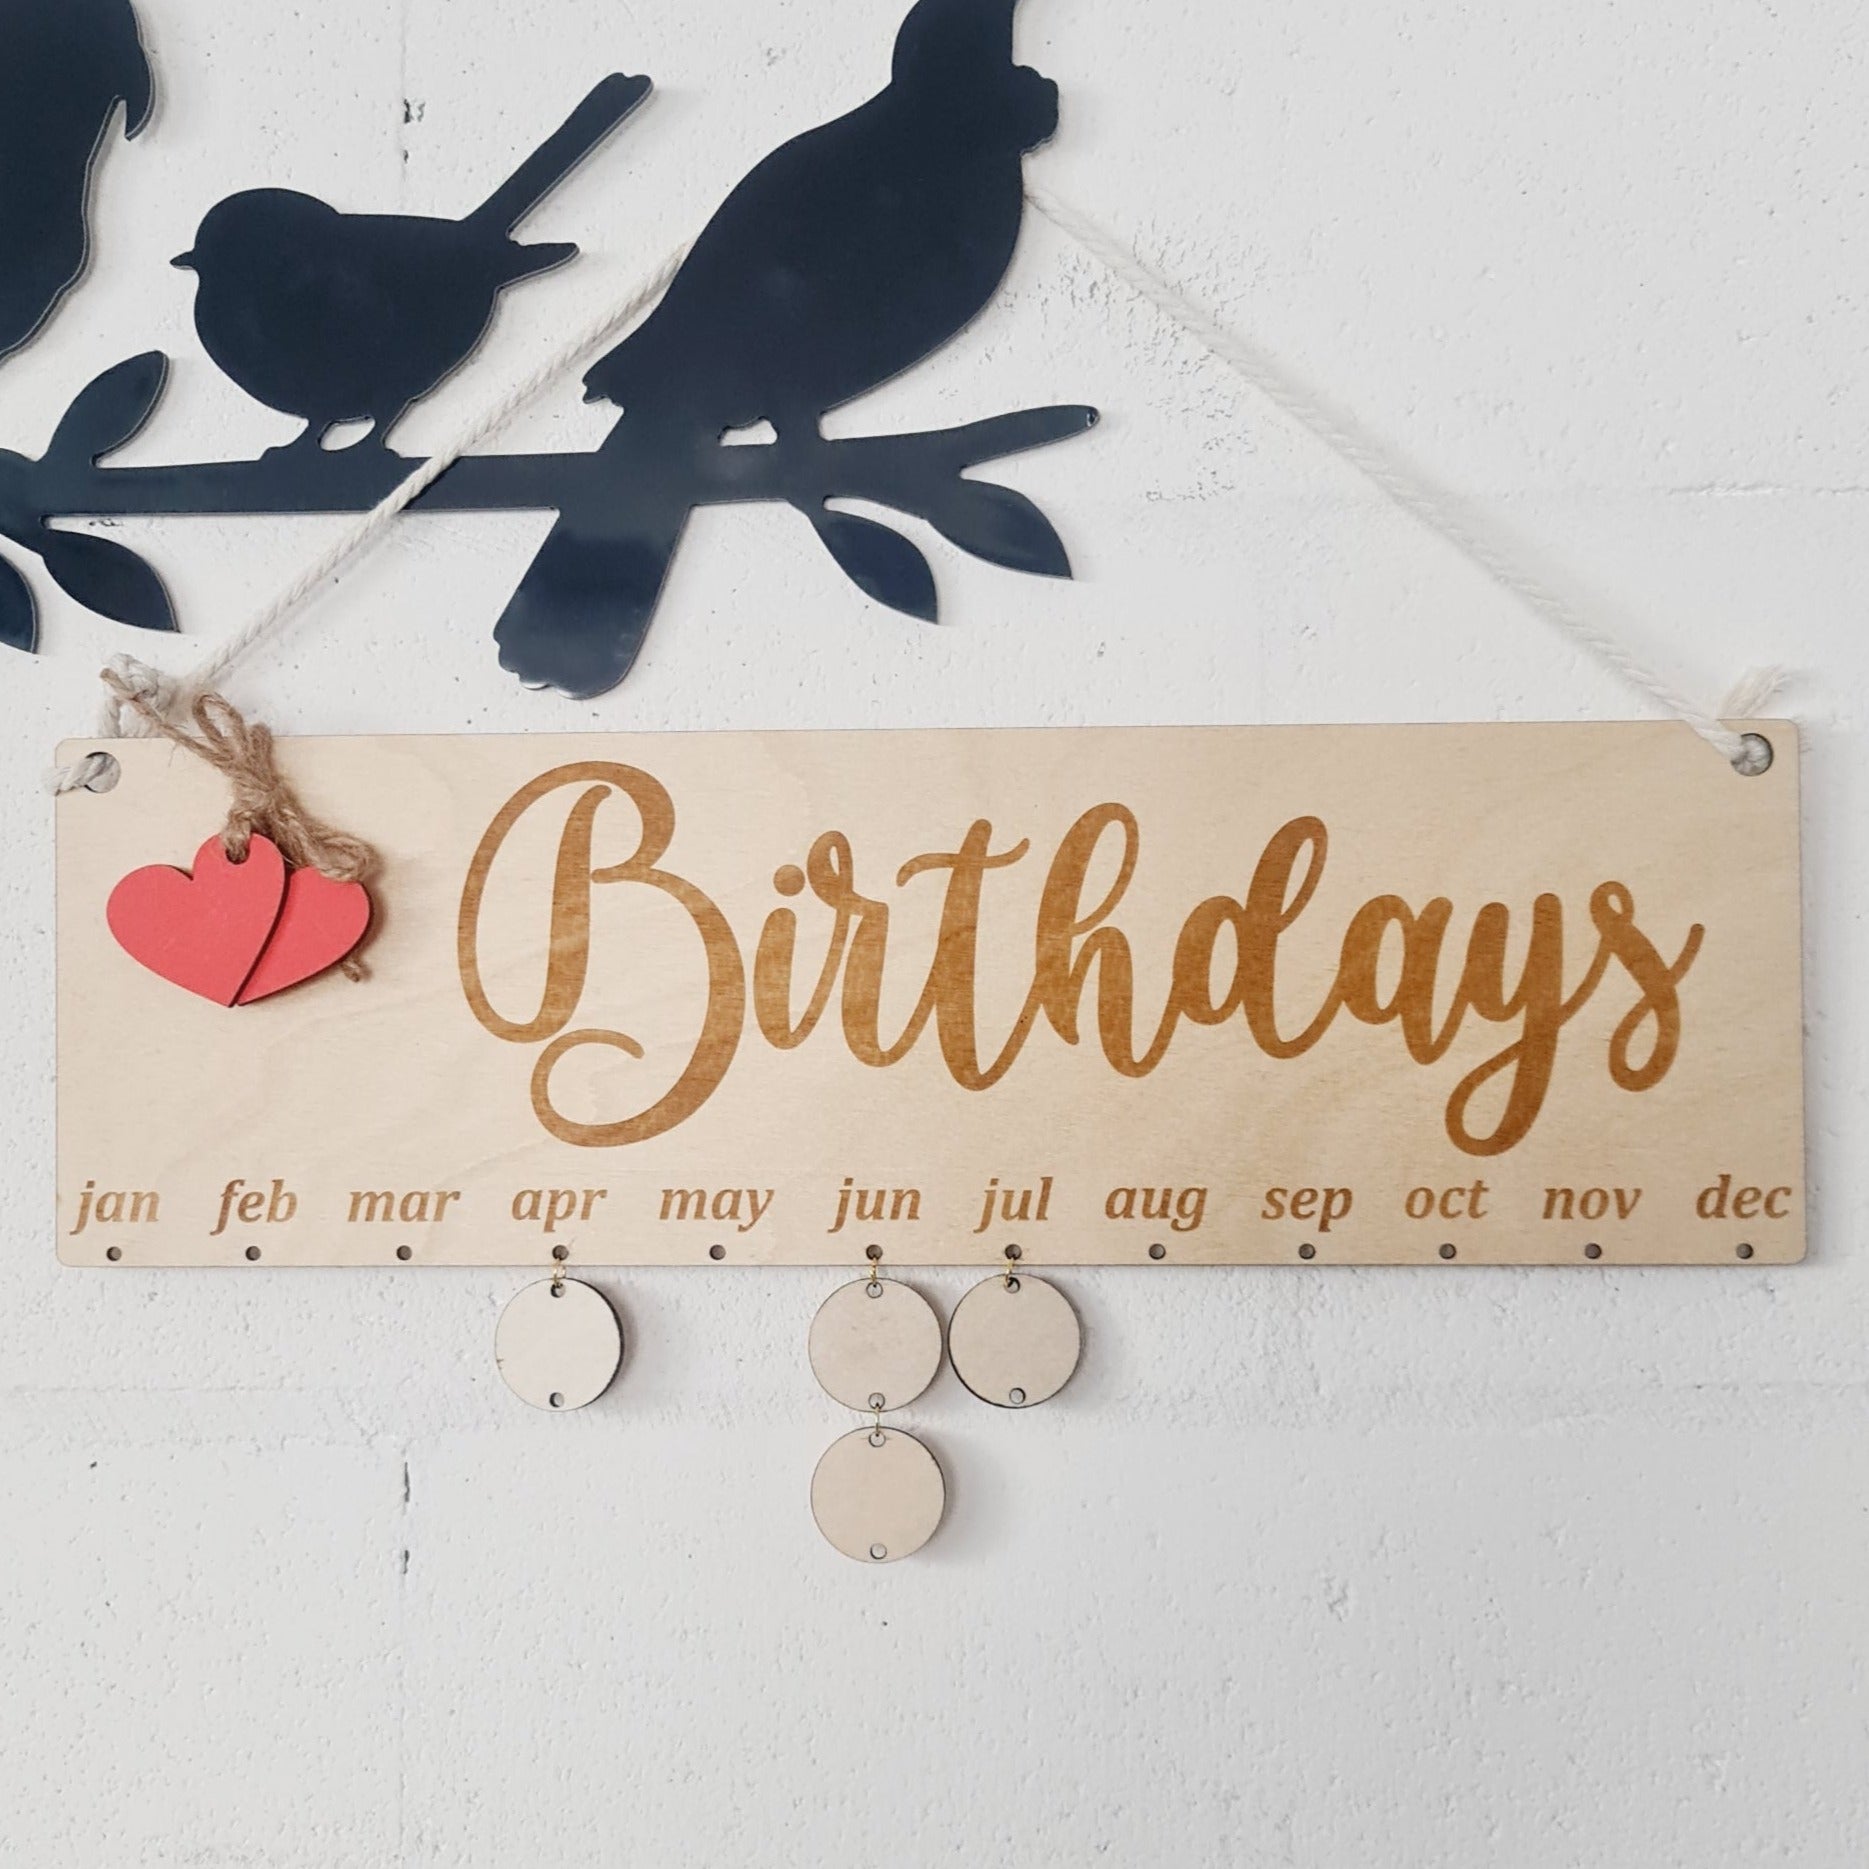 Wooden Engraved Birthday Calendar with Red Hearts and writeable discs for dates and names